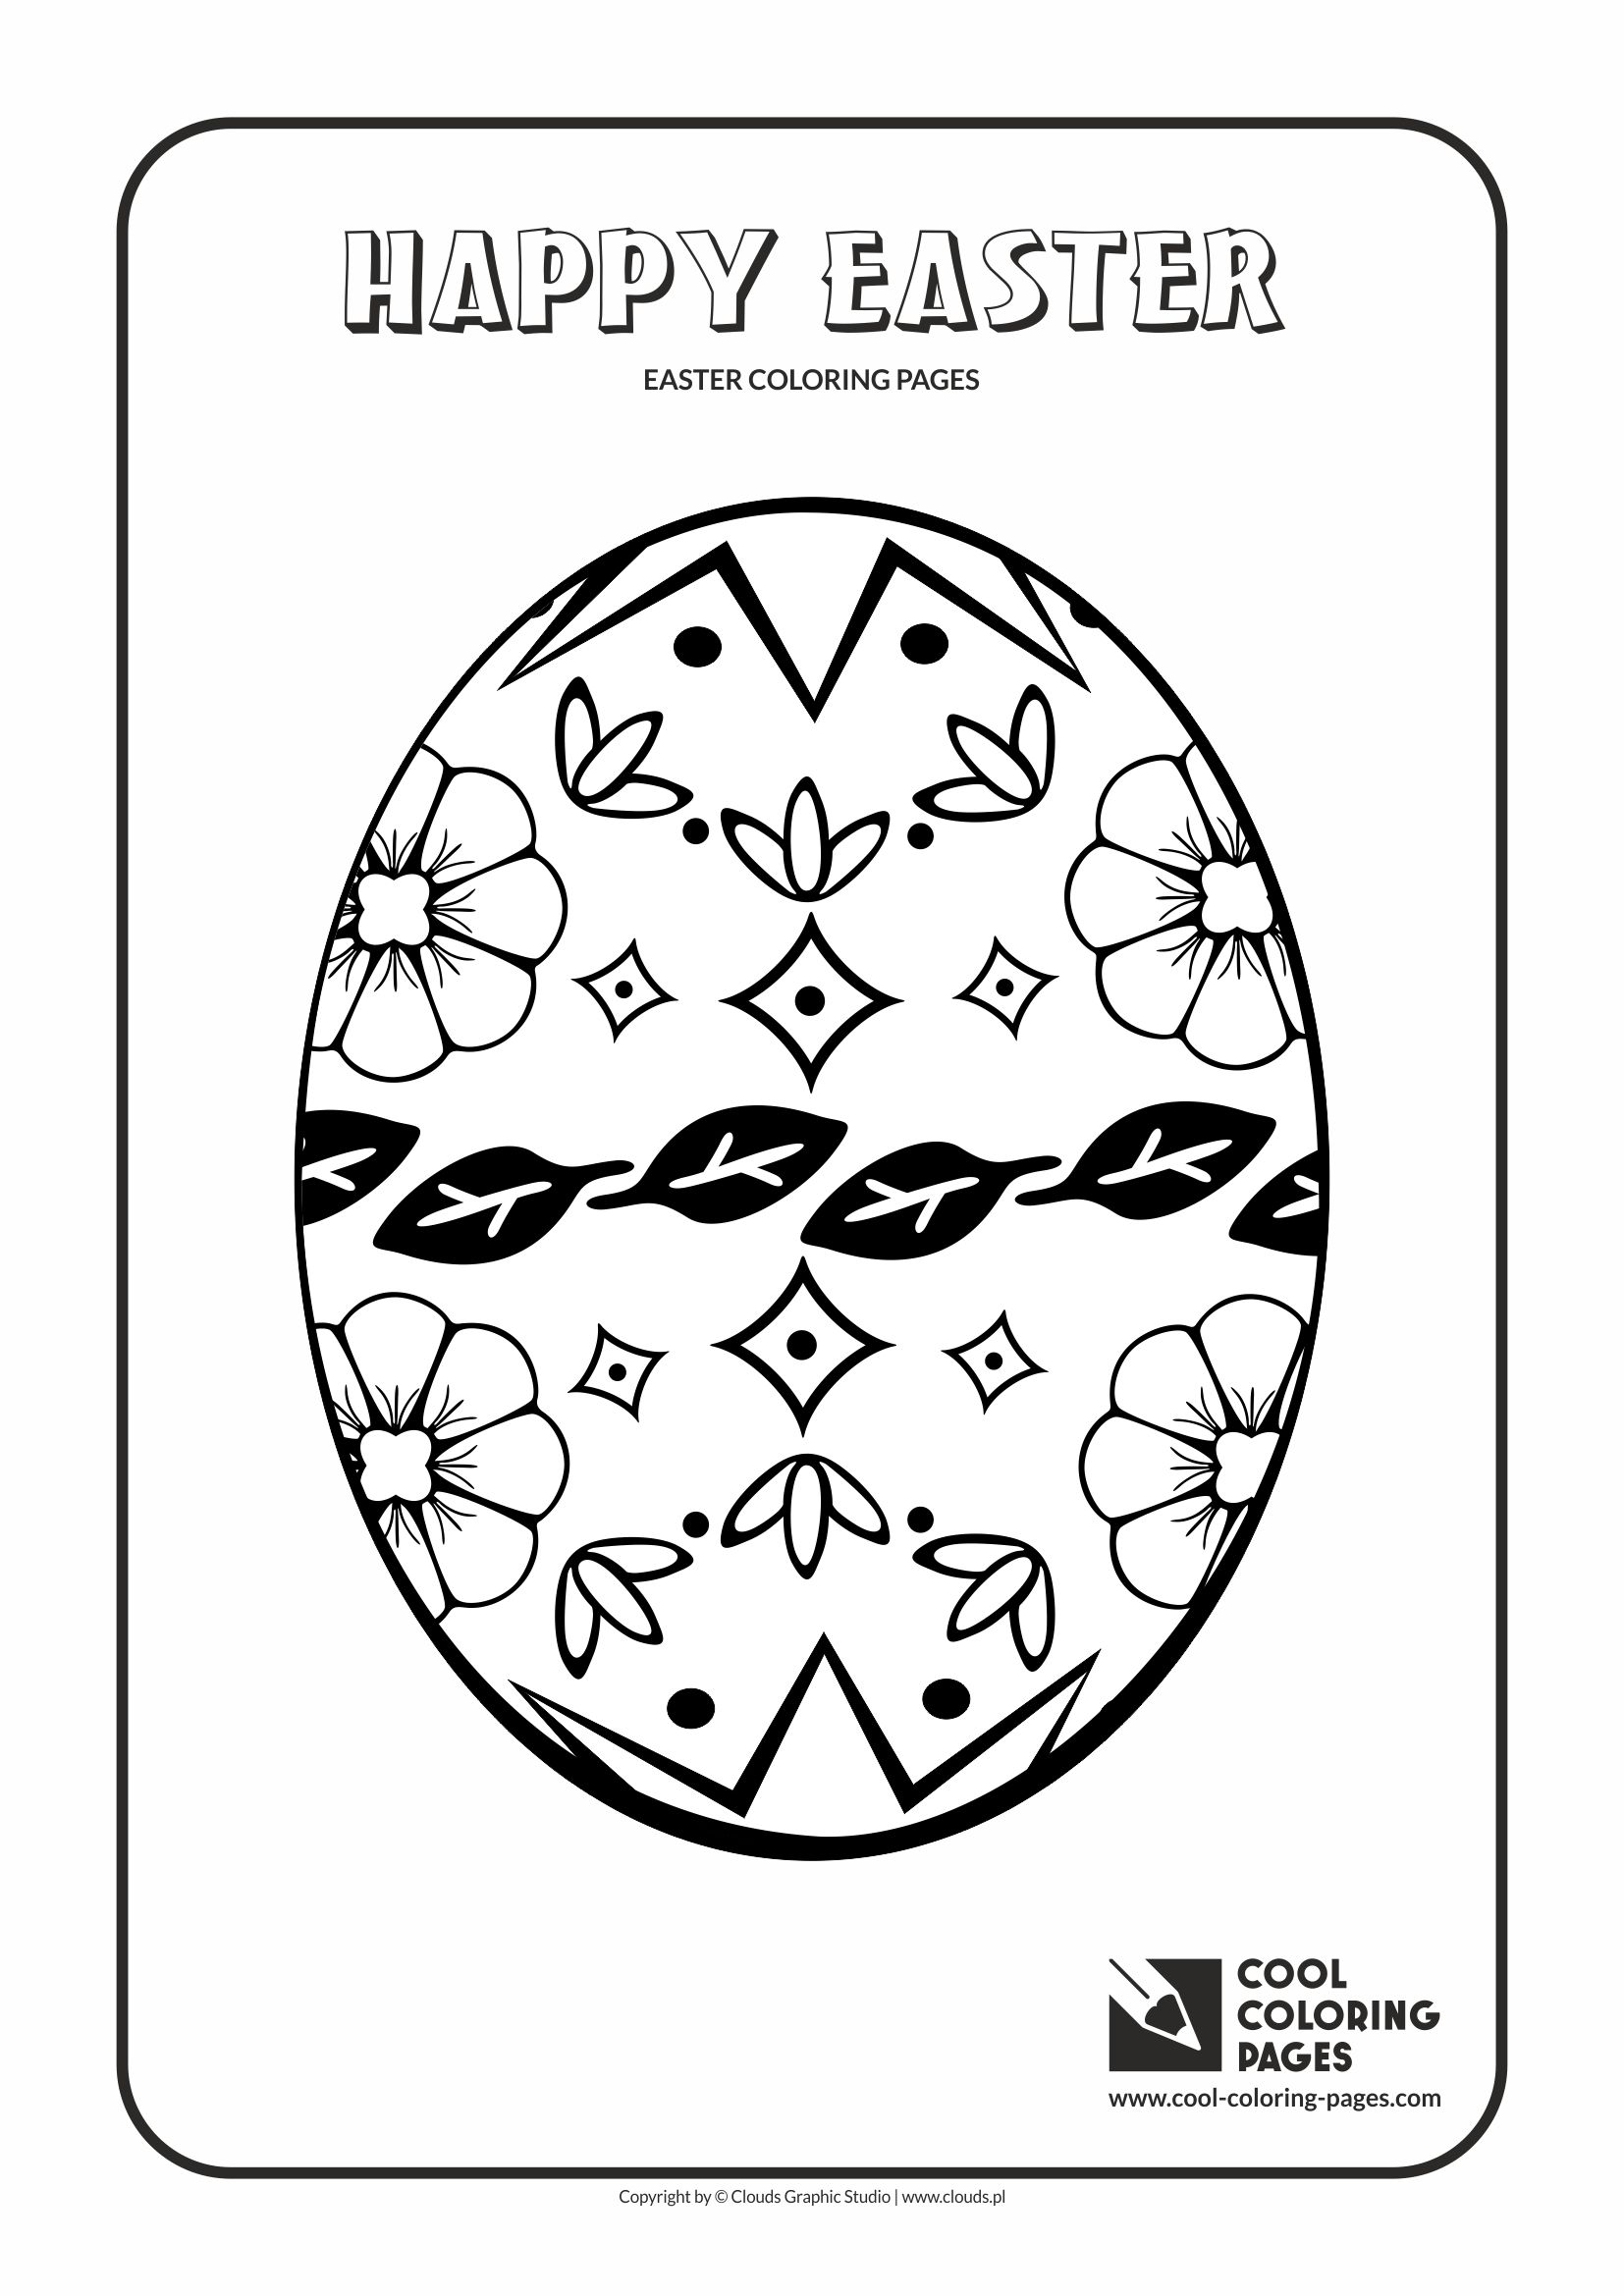 cool-coloring-pages-easter-coloring-pages-cool-coloring-pages-free